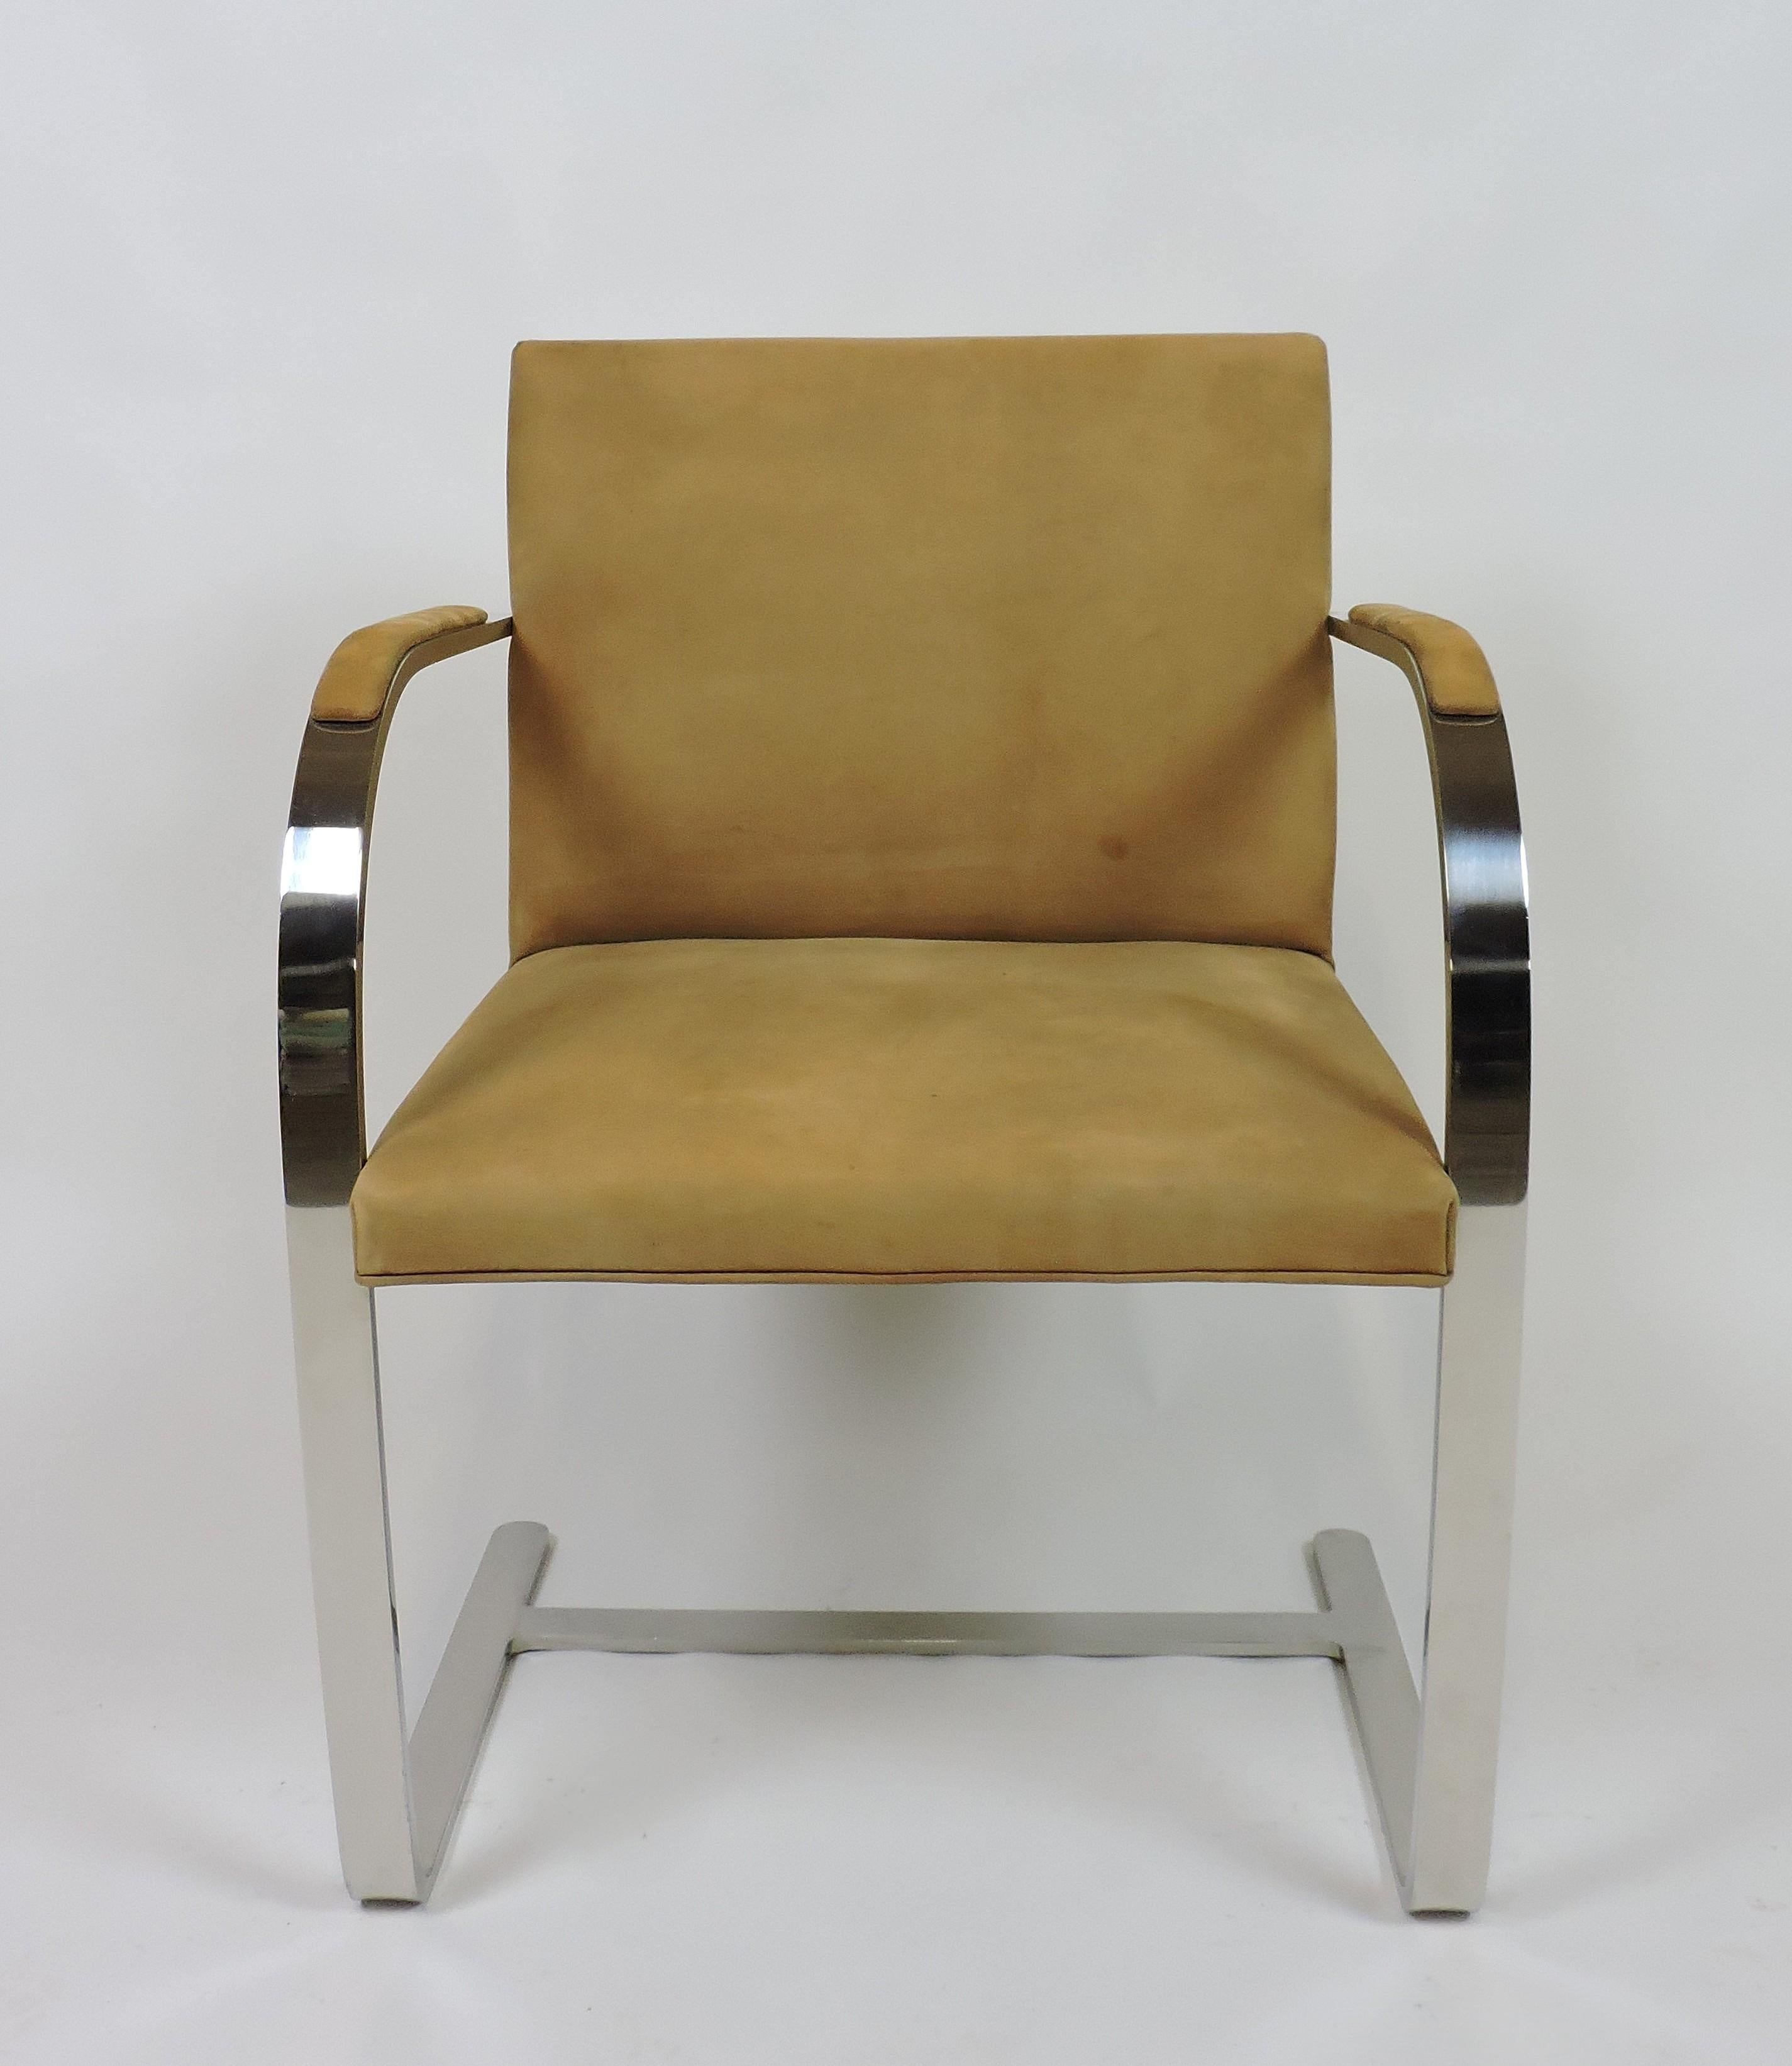 American Mies van der Rohe Brno Stainless Steel Flat Bar Chair for Knoll